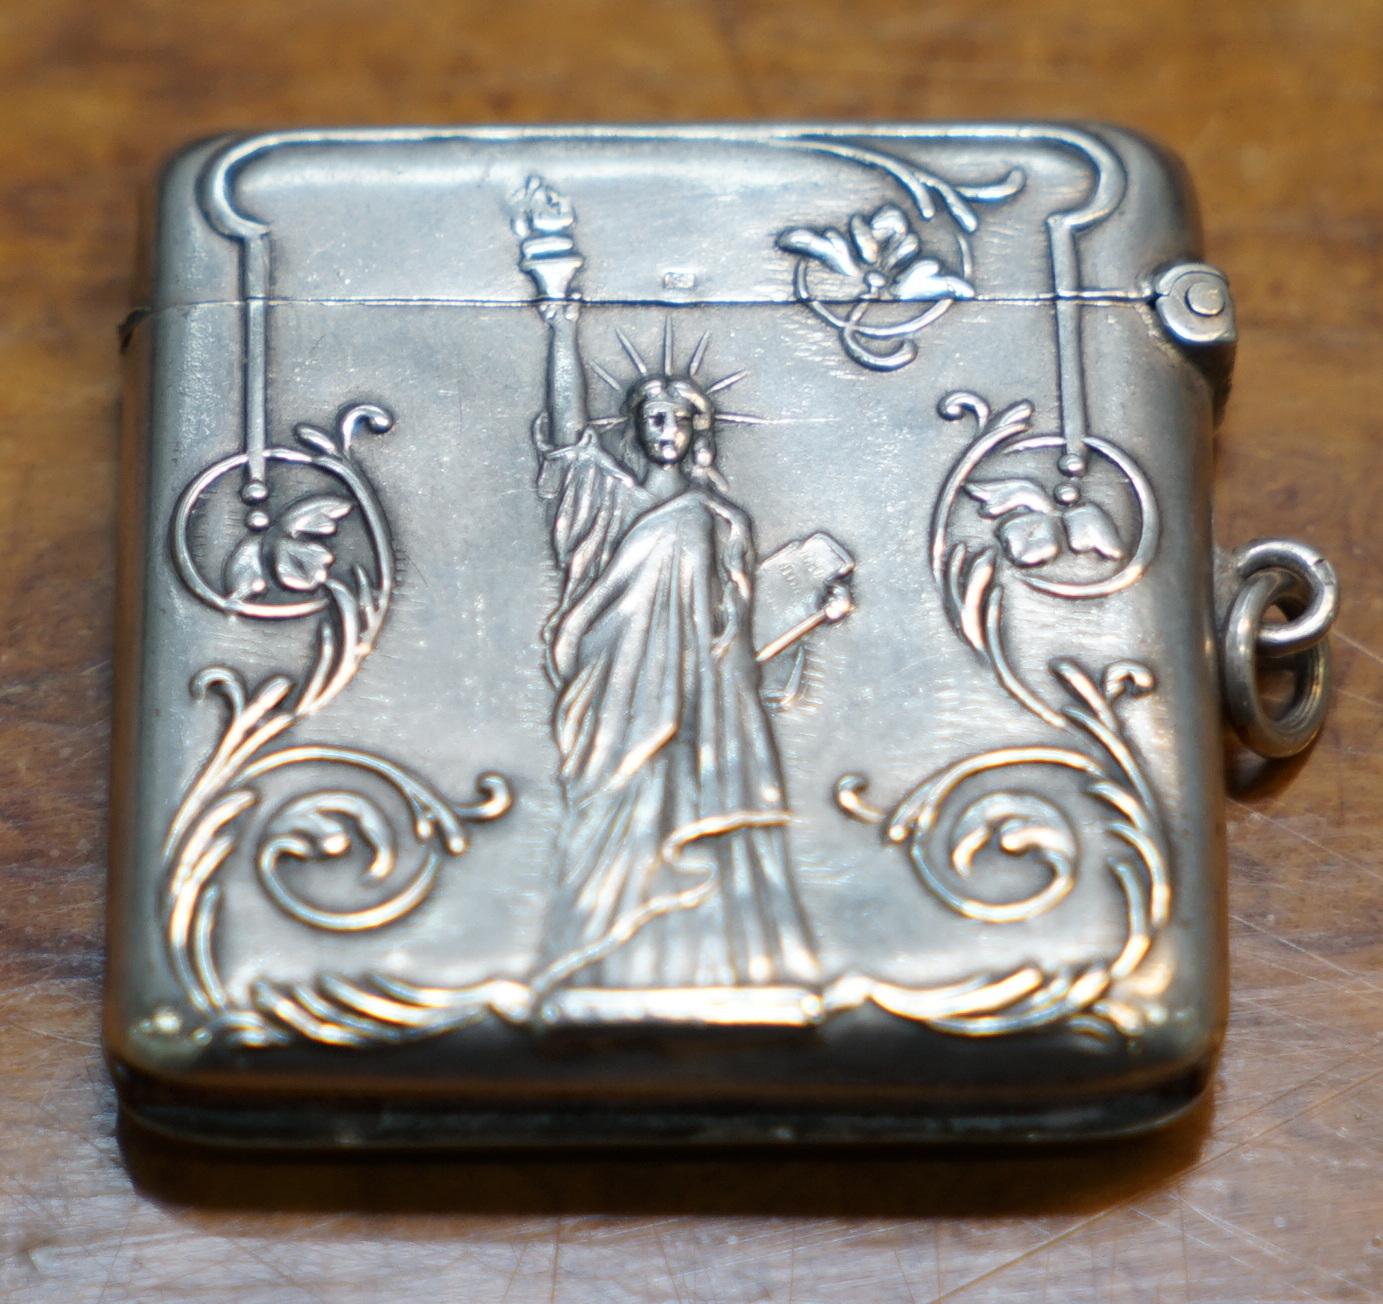 We are delighted to offer for sale this stunning handmade solid silver 800-grade vesta case depicting the statue of Liberty

A good looking well made and decorative collectable piece

Dimensions:

Height 4.25cm

Width 5cm

Depth